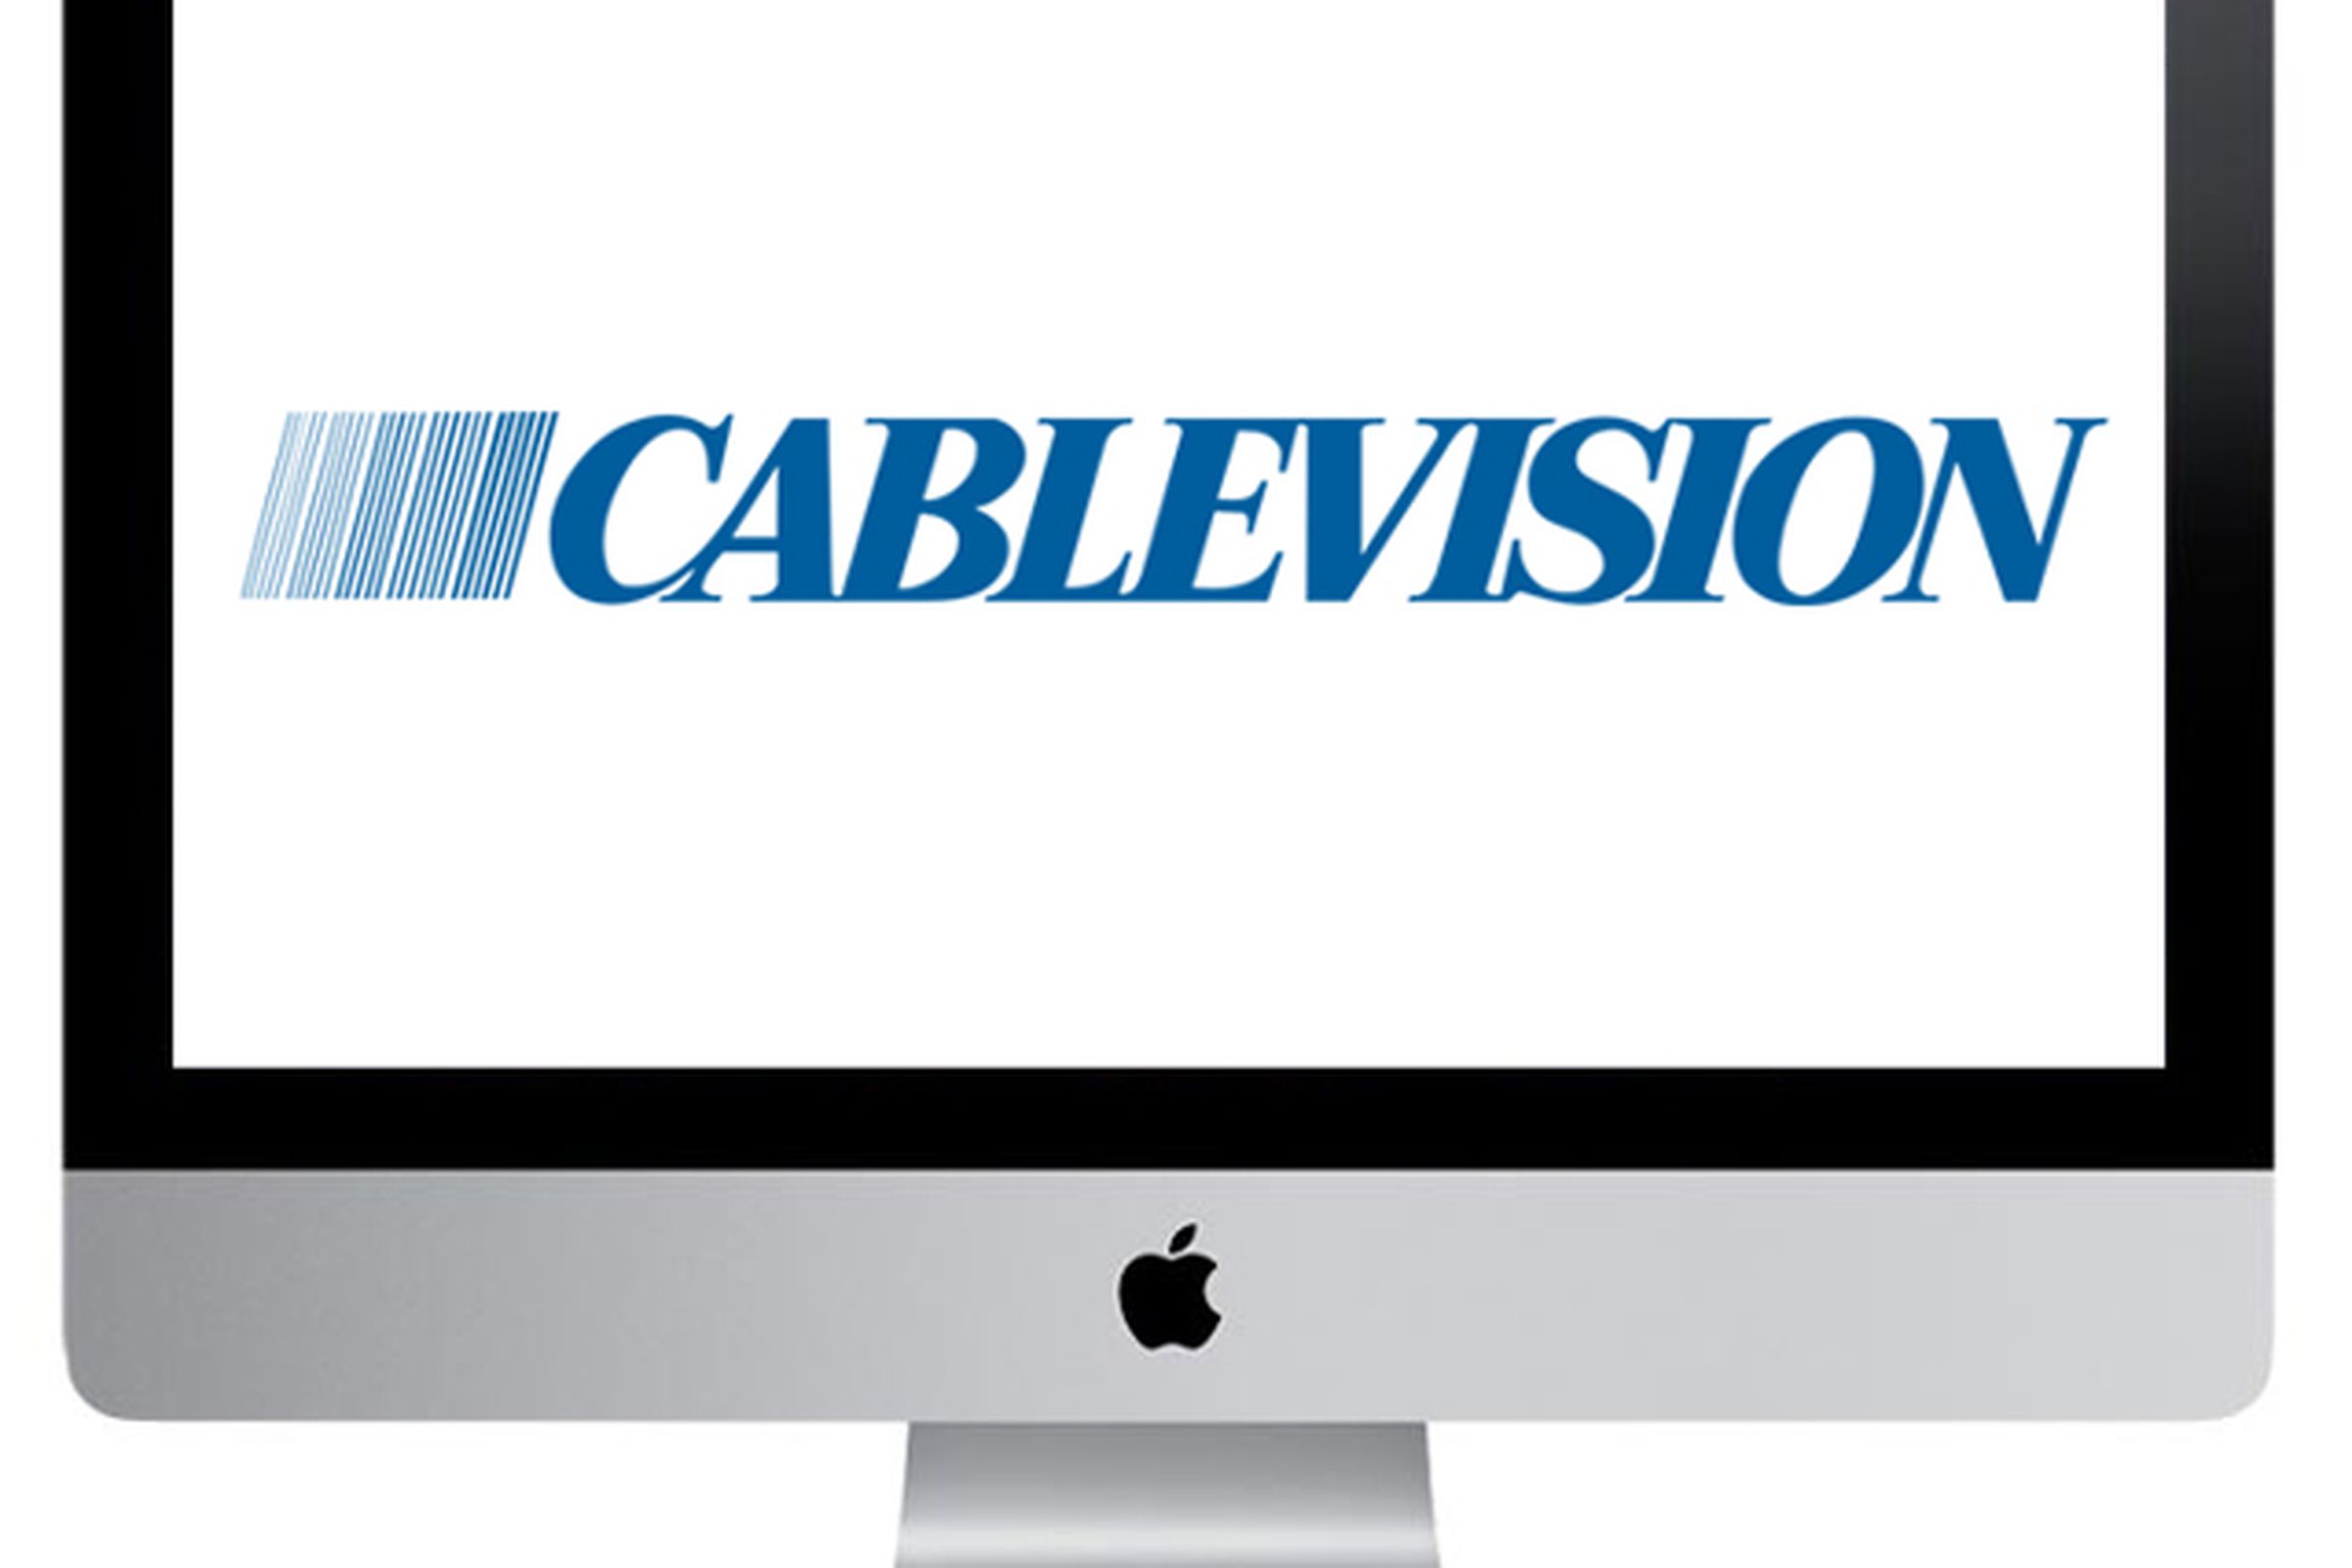 Cablevision iMac